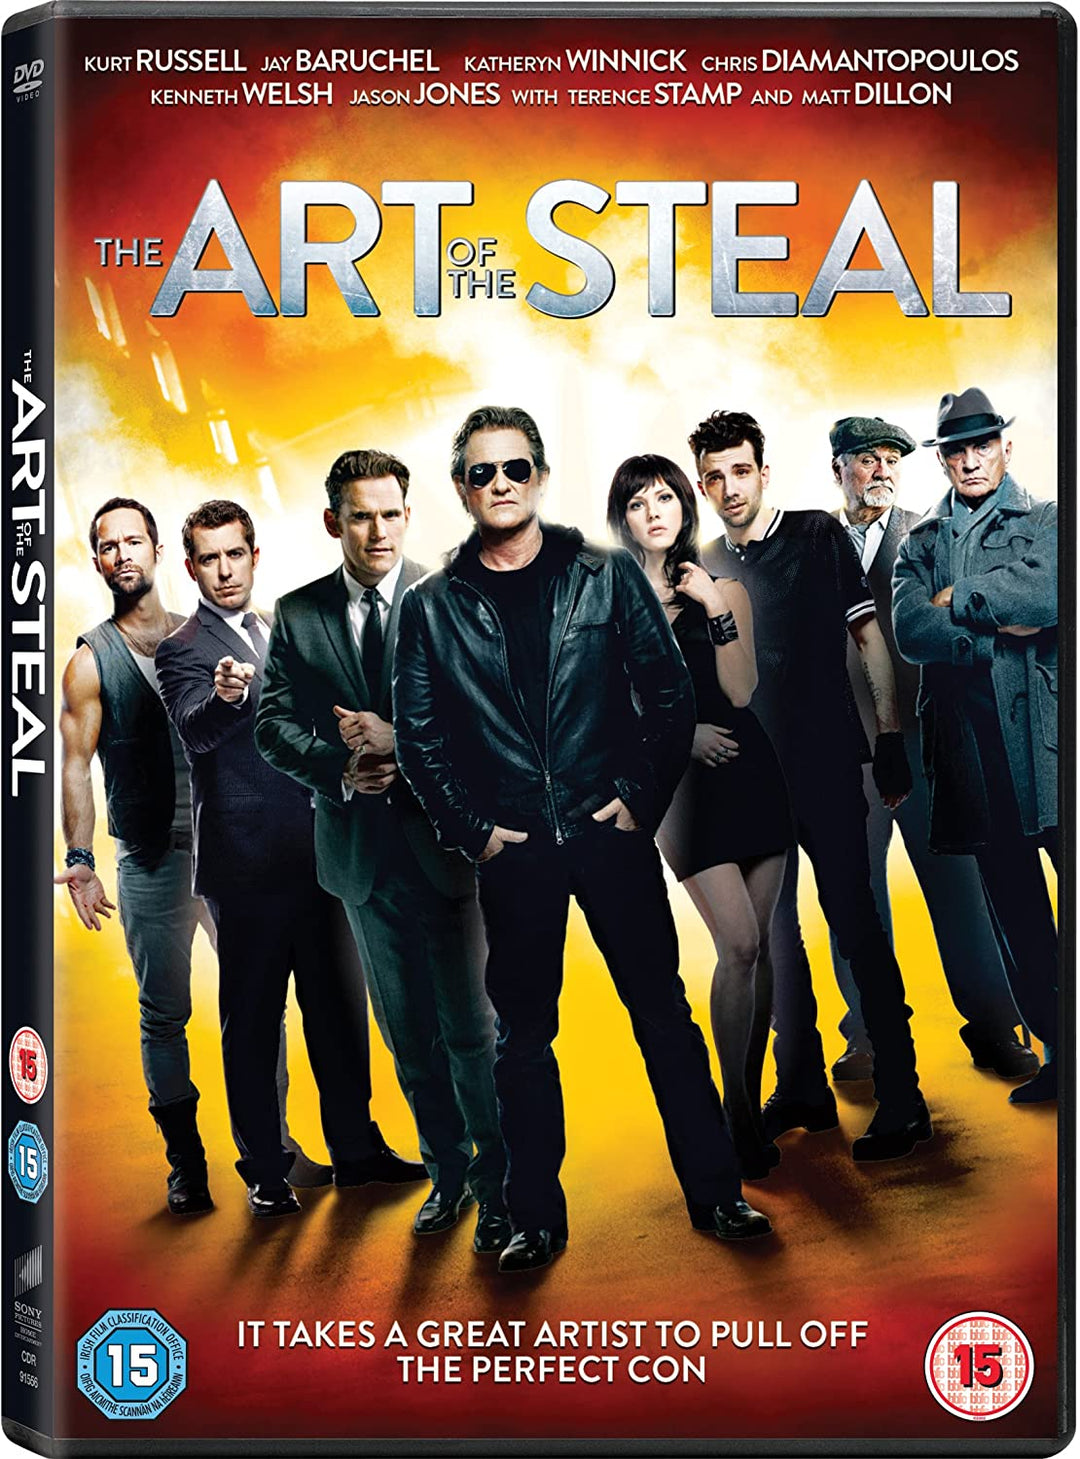 The Art Of The Steal [2014] - Comedy/Crime [DVD]